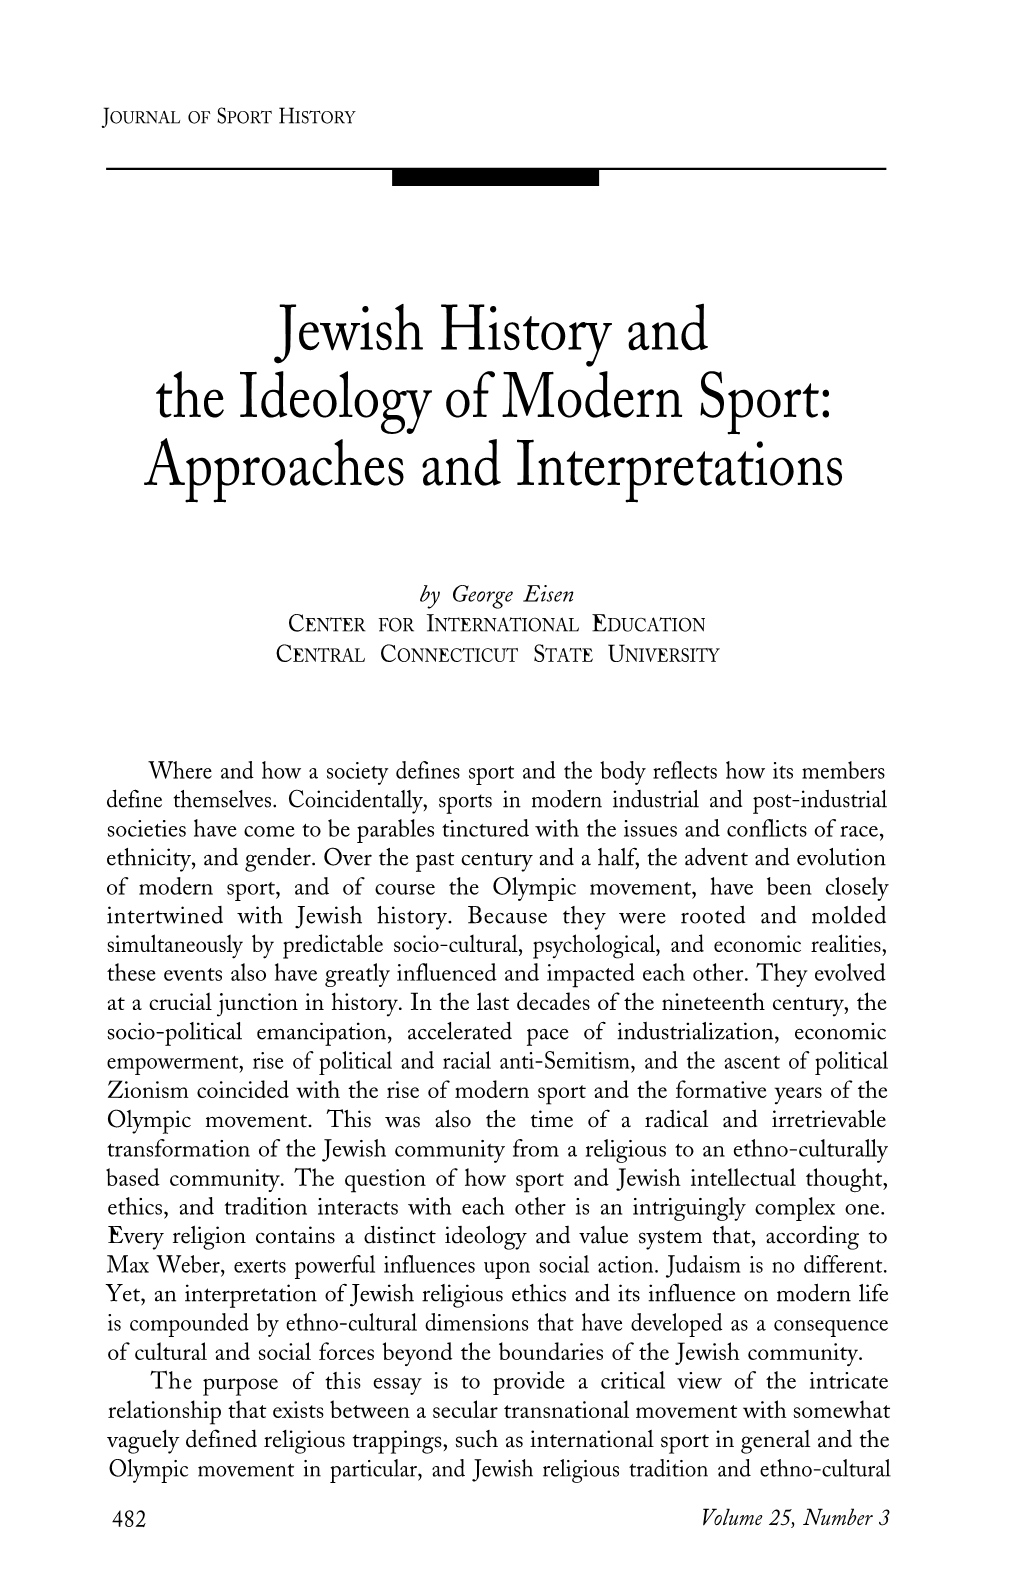 Jewish History and the Ideology of the Modern Sport